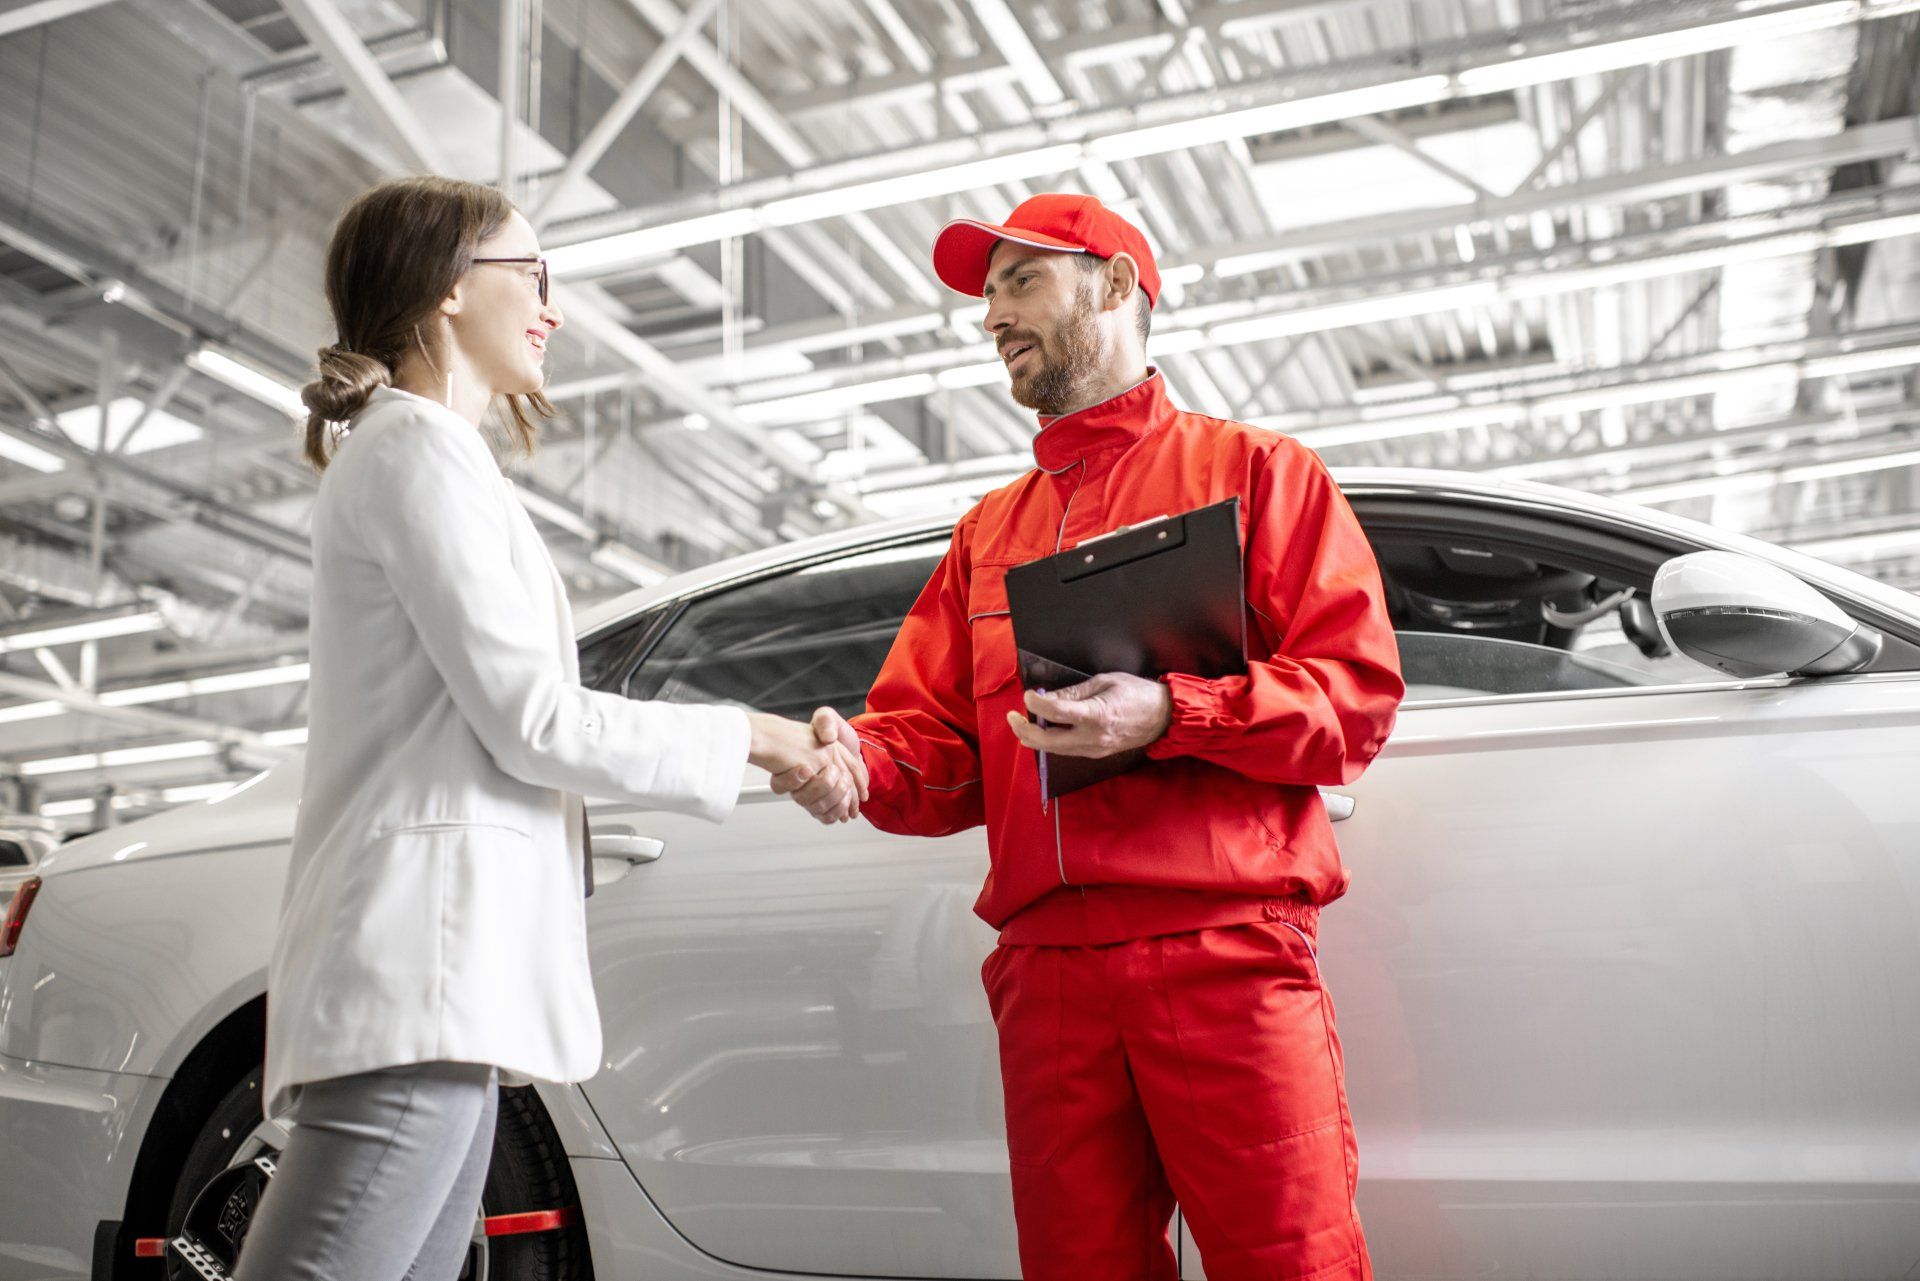 A woman is shaking hands with a mechanic in a garage.